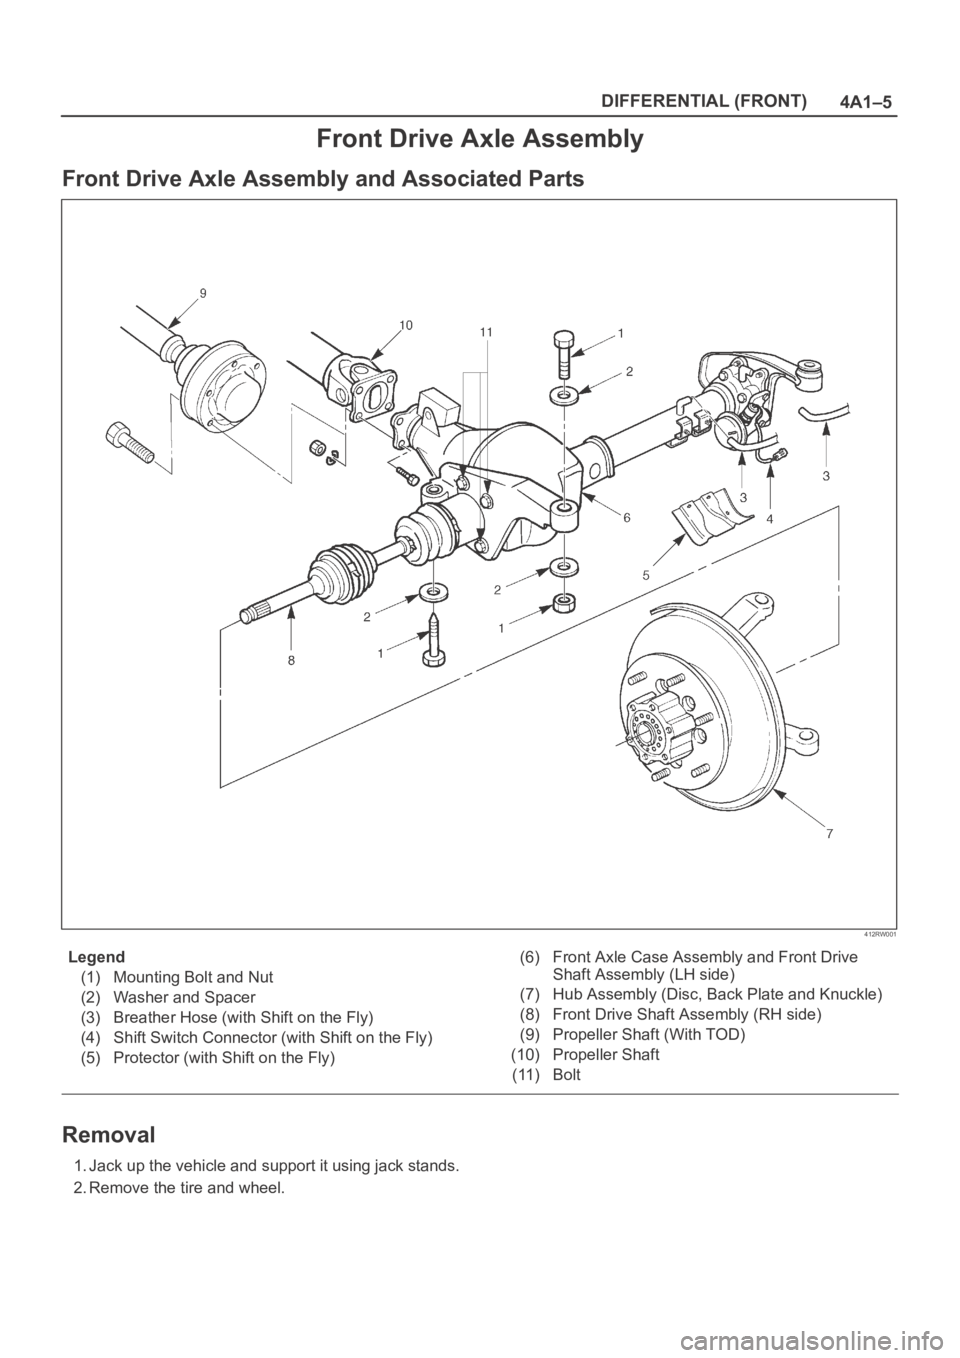 OPEL FRONTERA 1998  Workshop Manual 4A1–5 DIFFERENTIAL (FRONT)
Front Drive Axle Assembly
Front Drive Axle Assembly and Associated Parts
412RW001
Legend
(1) Mounting Bolt and Nut
(2) Washer and Spacer
(3) Breather Hose (with Shift on t